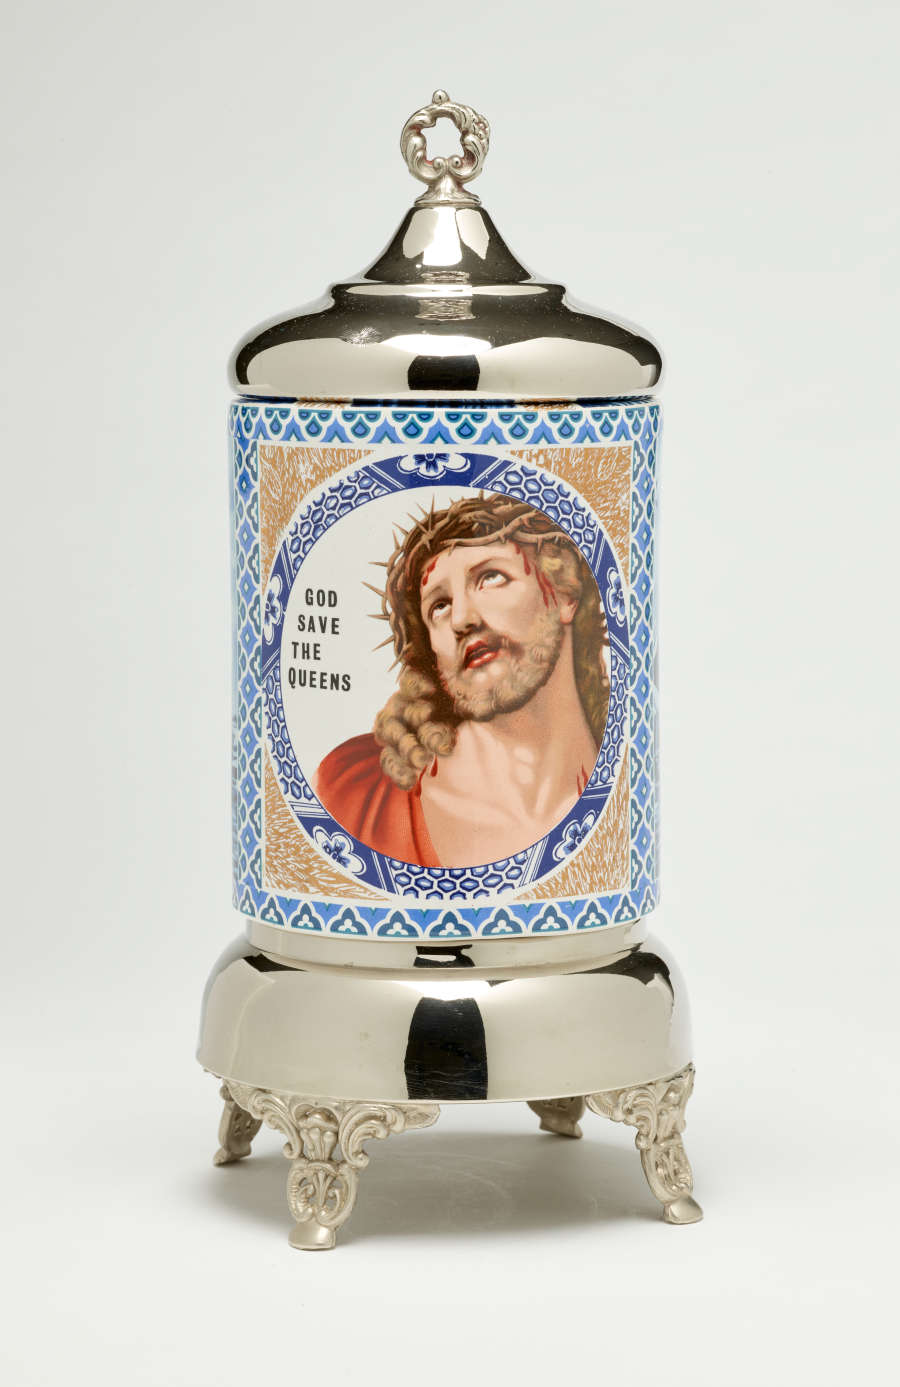 Sculpture with ceramic body covered in blue, white, and tan decoration. Image in the center of Jesus next to the words “God save the queens.” Ceramic is framed by a metal top and base on four ornate feet.